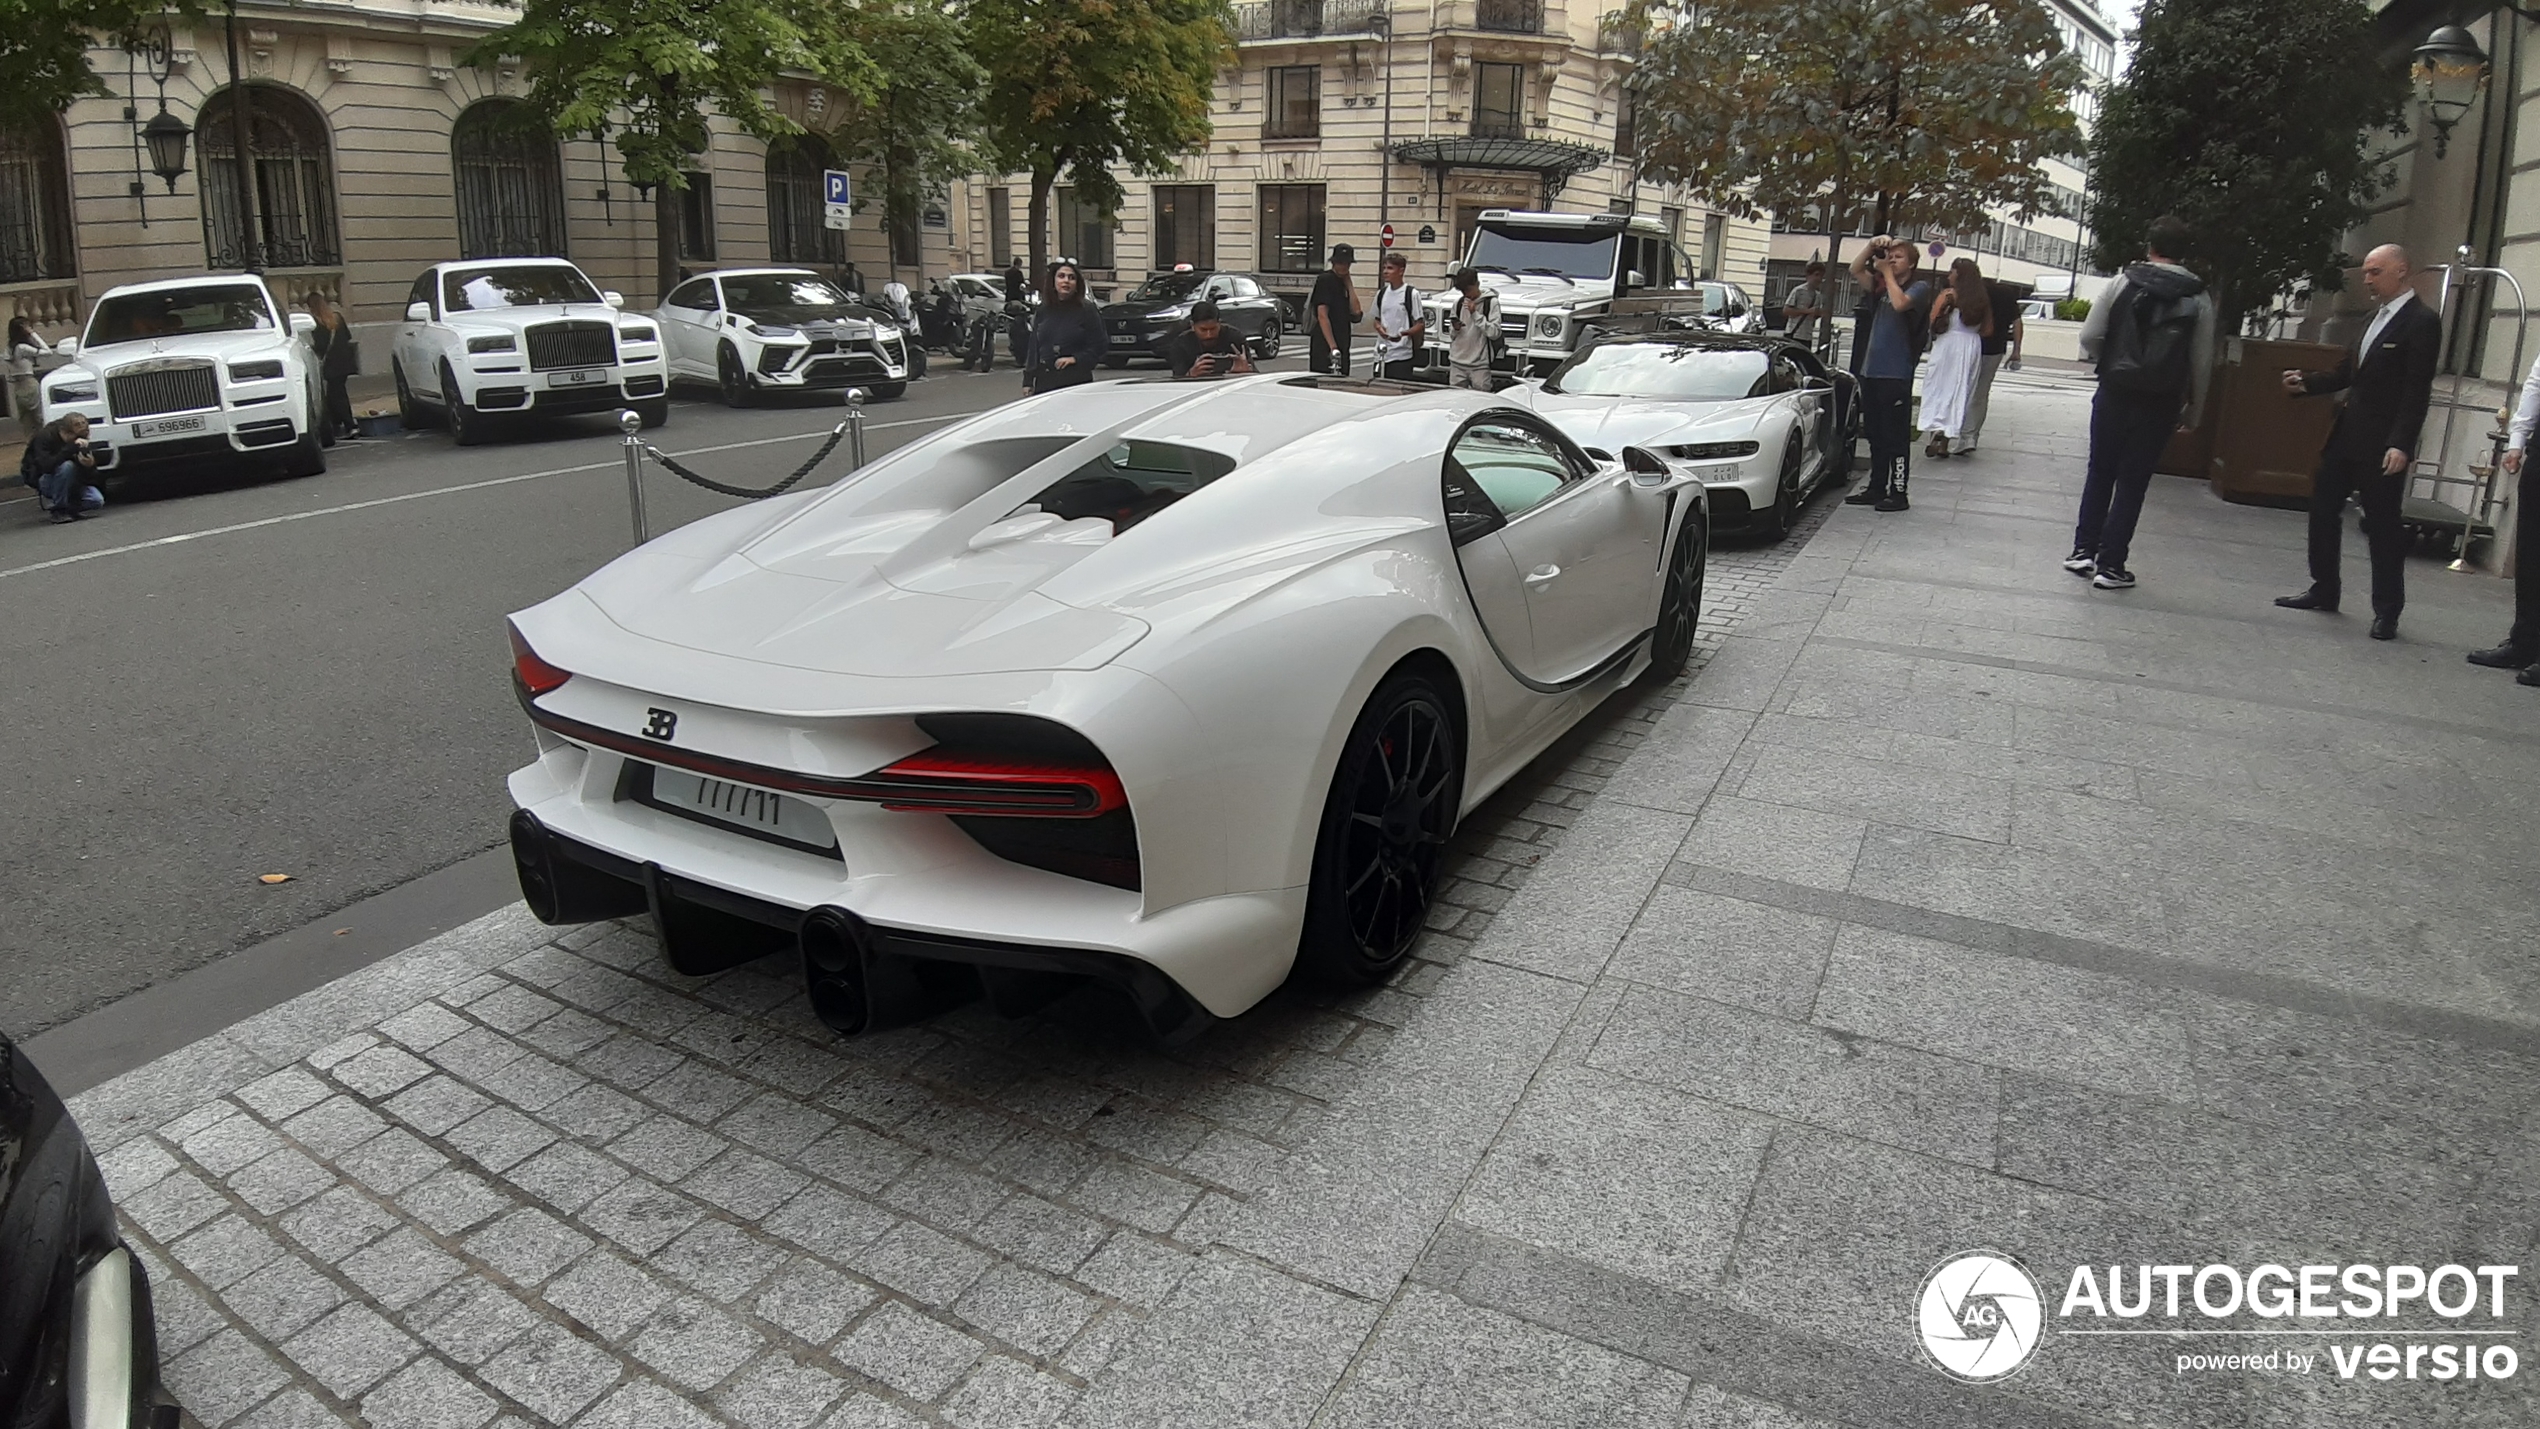 The Bugatti Chiron Super Sport Hermes One of One has now arrived in Paris